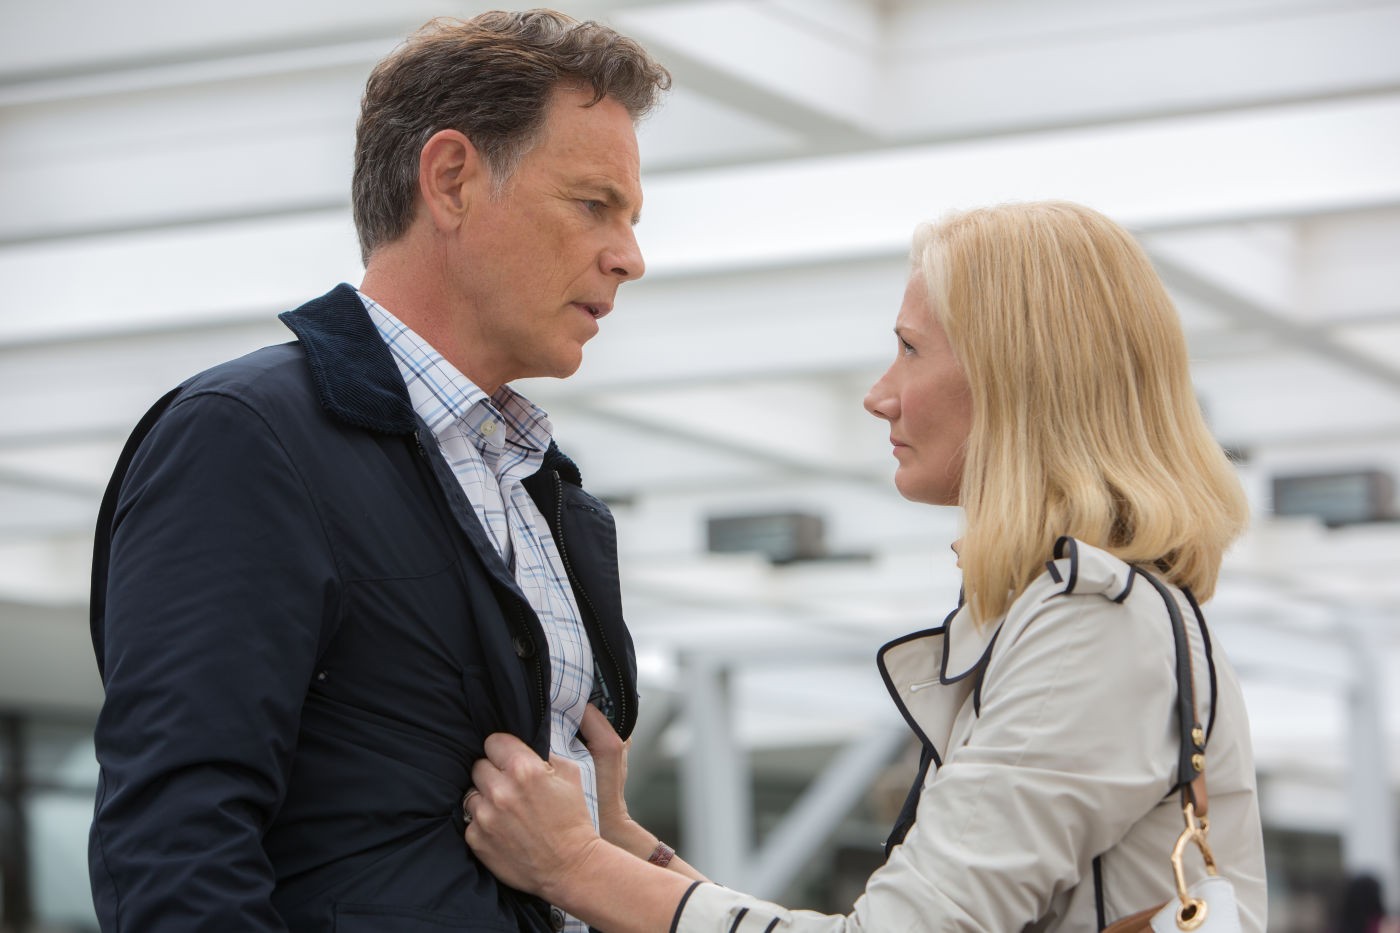 Bruce Greenwood stars as Hugh Butterfield and Joely Richardson stars as Anne Butterfield in Universal Pictures' Endless Love (2014)